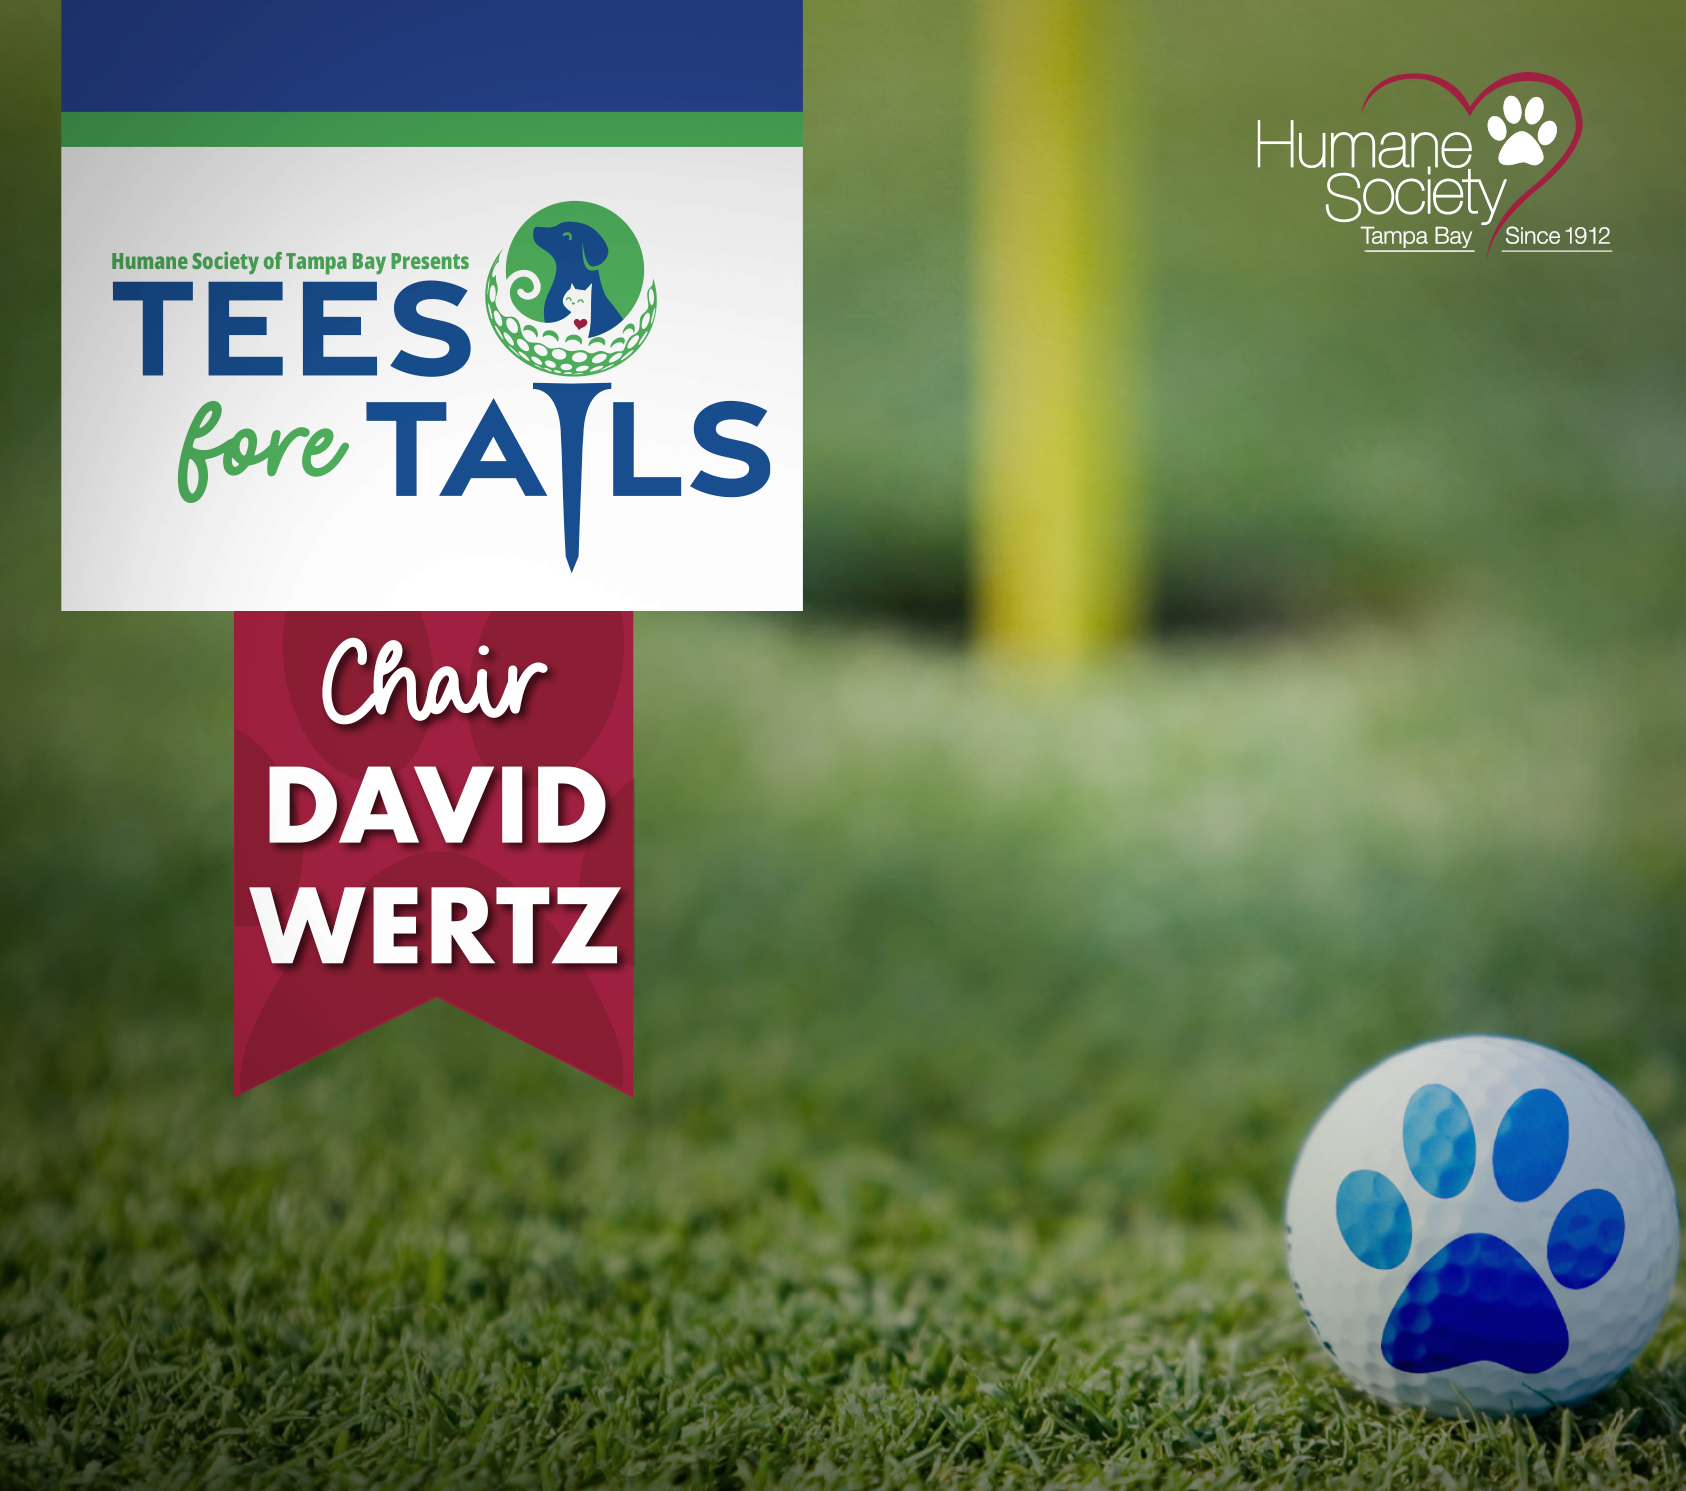 A golf ball with a blue paw print is close up on a golf course with the words "Tees Fore Tails" and "Chair David Wertz"